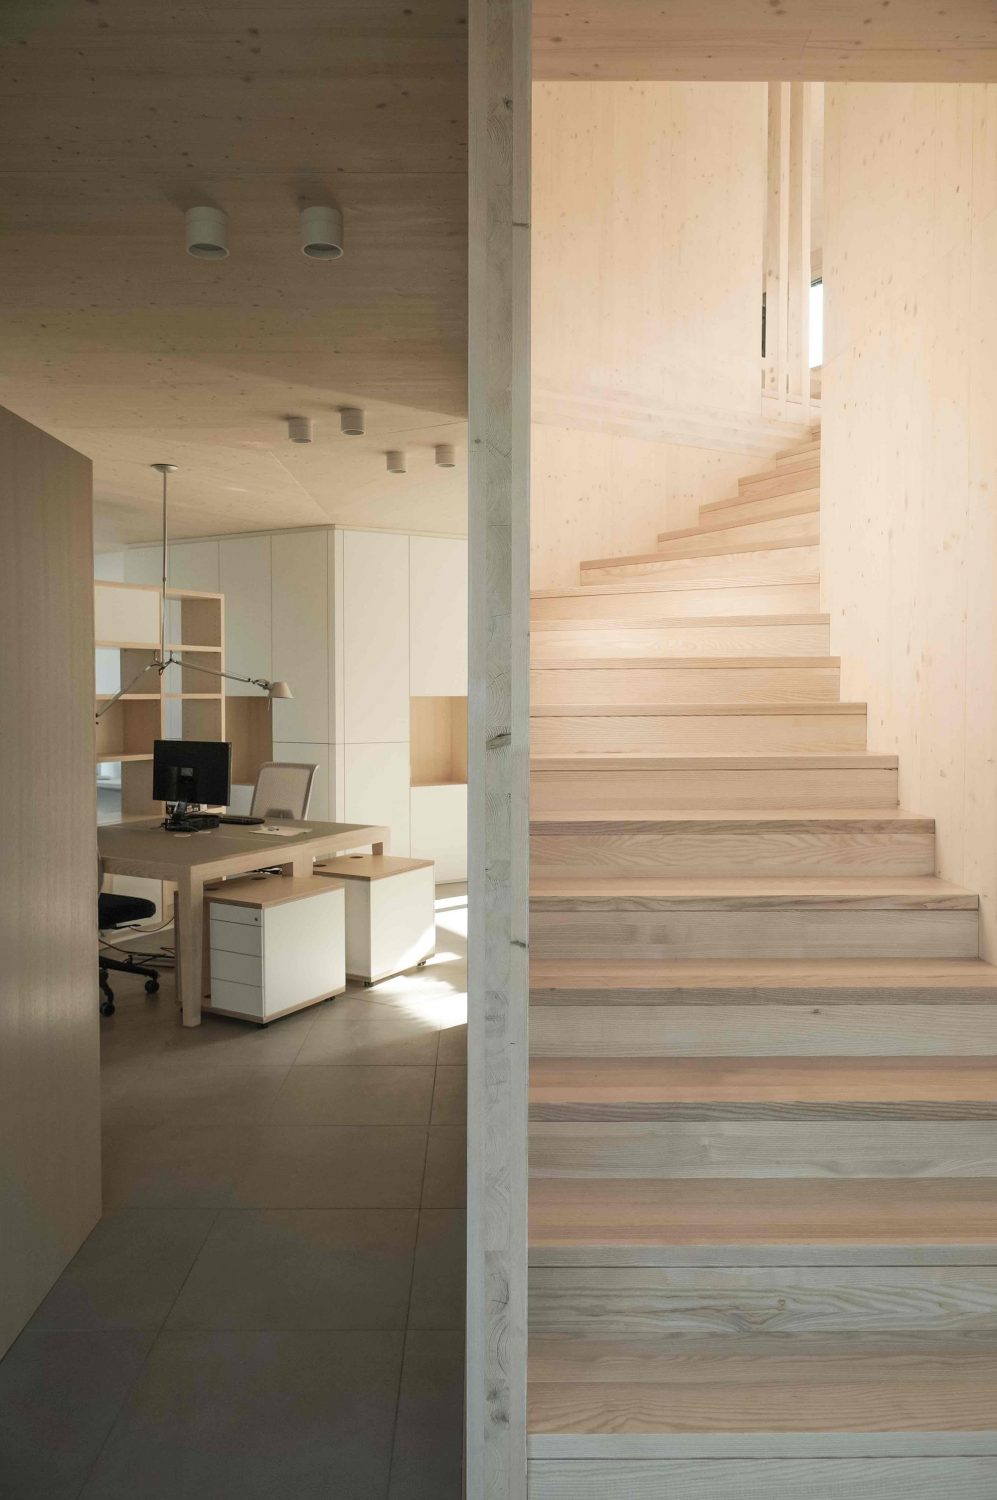 52 Cubic Wood by JOSEP and Atelier Haumer